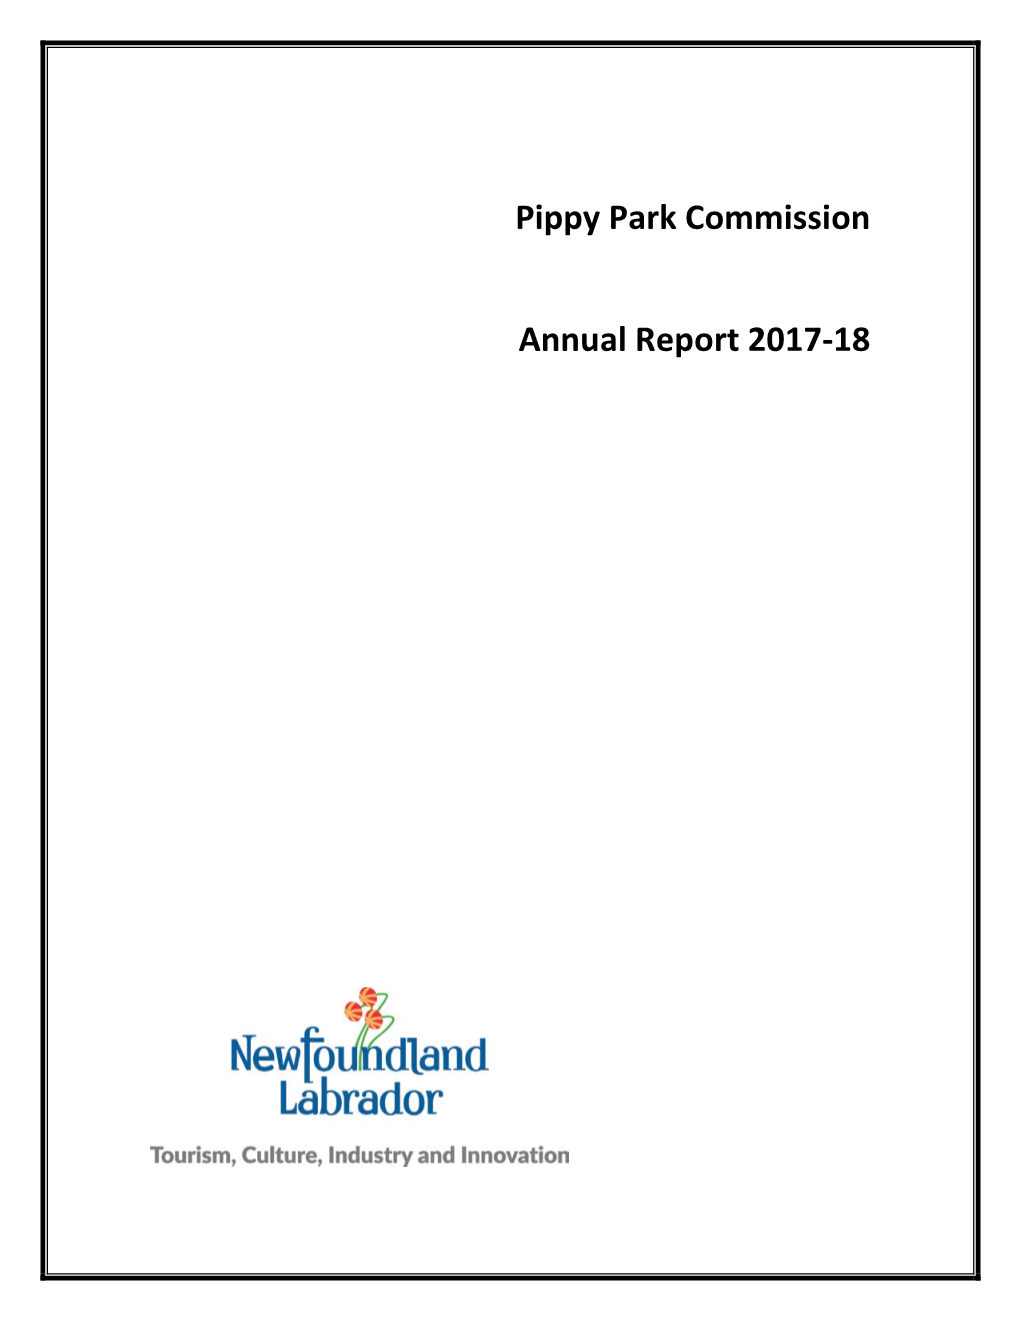 Pippy Park Commission Annual Report 2017-18